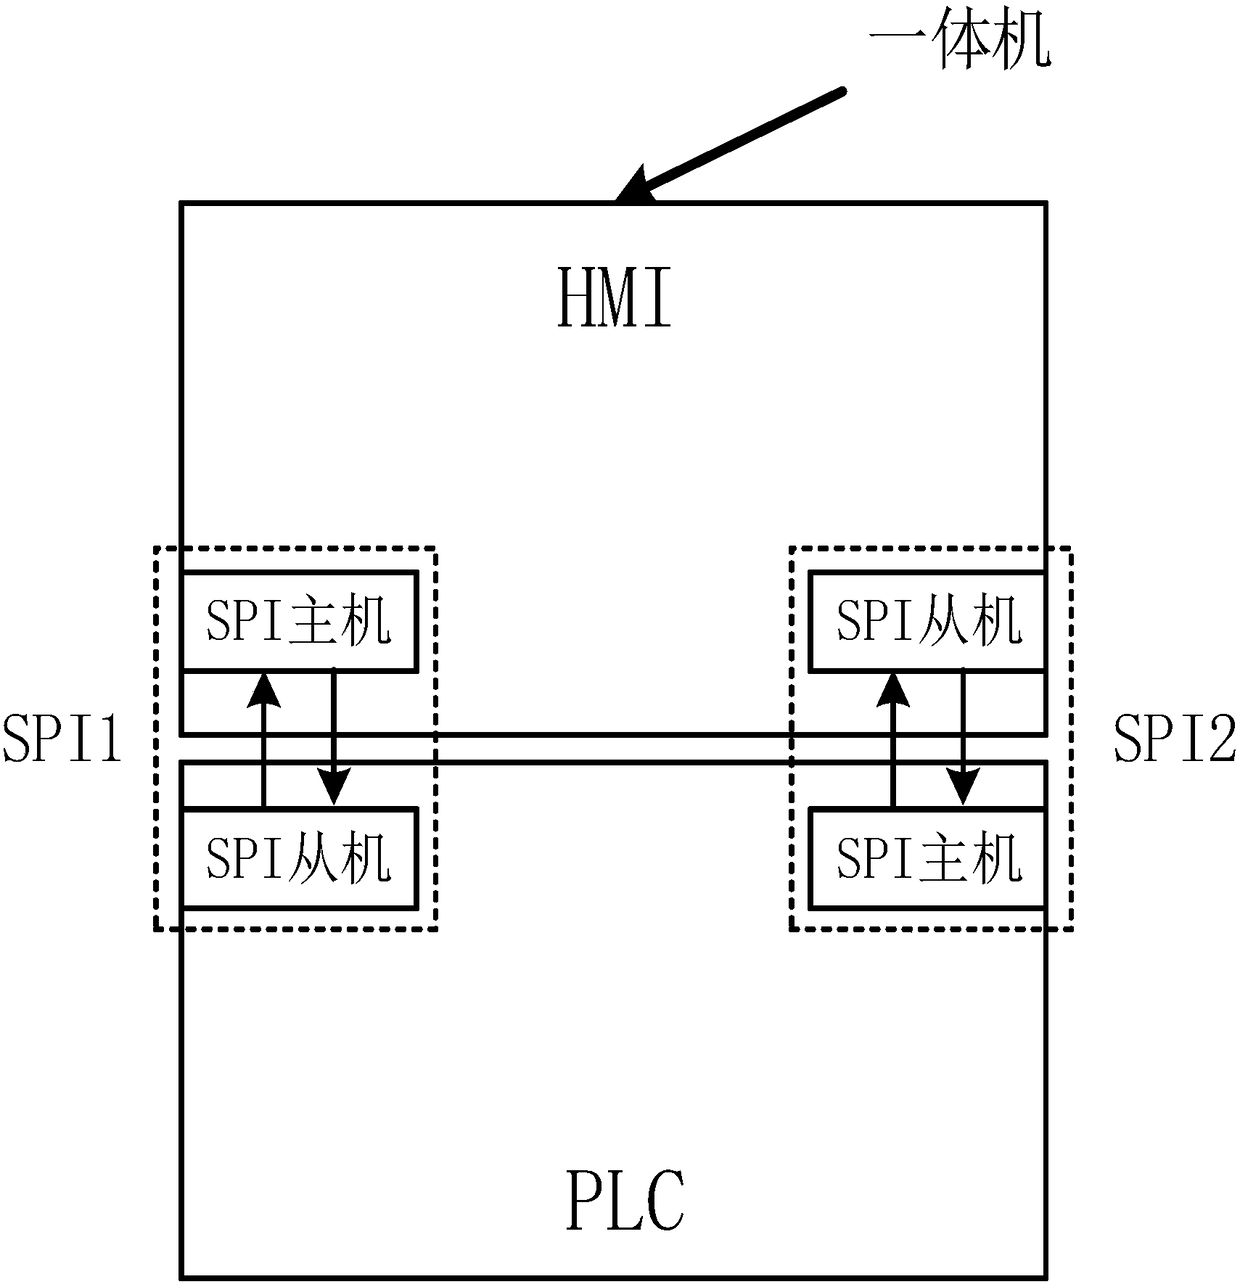 All-in-one machine through combination of HMI and PLC functions and communication method thereof